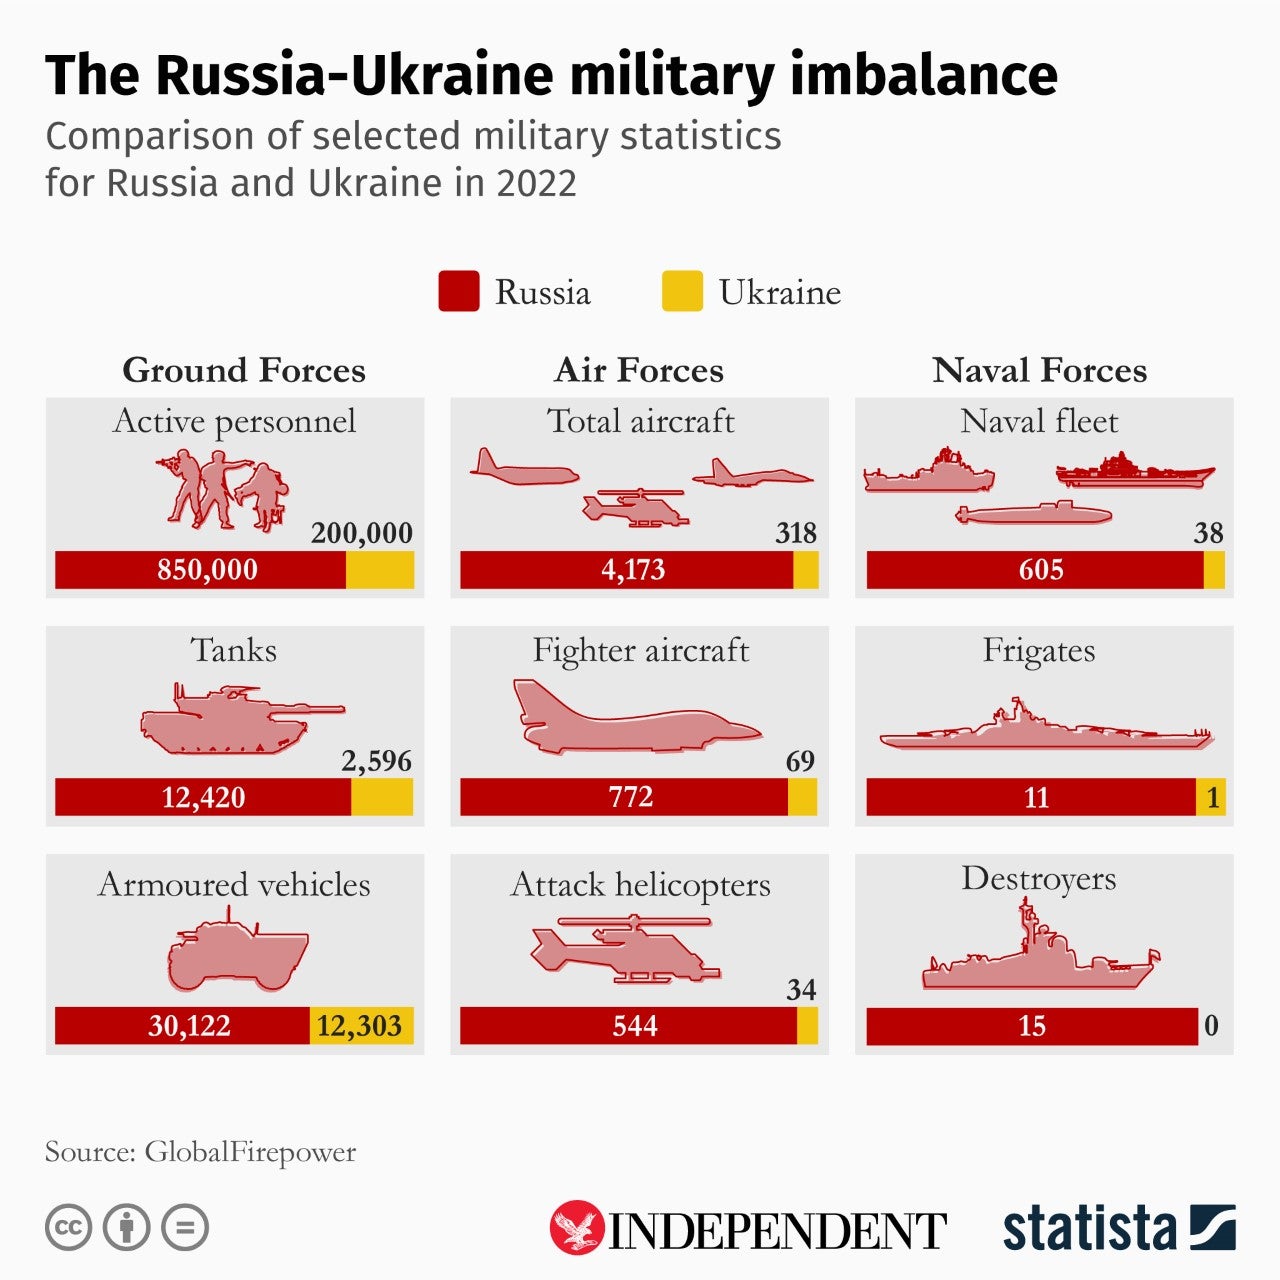 The relative military strength of Ukraine and Russia